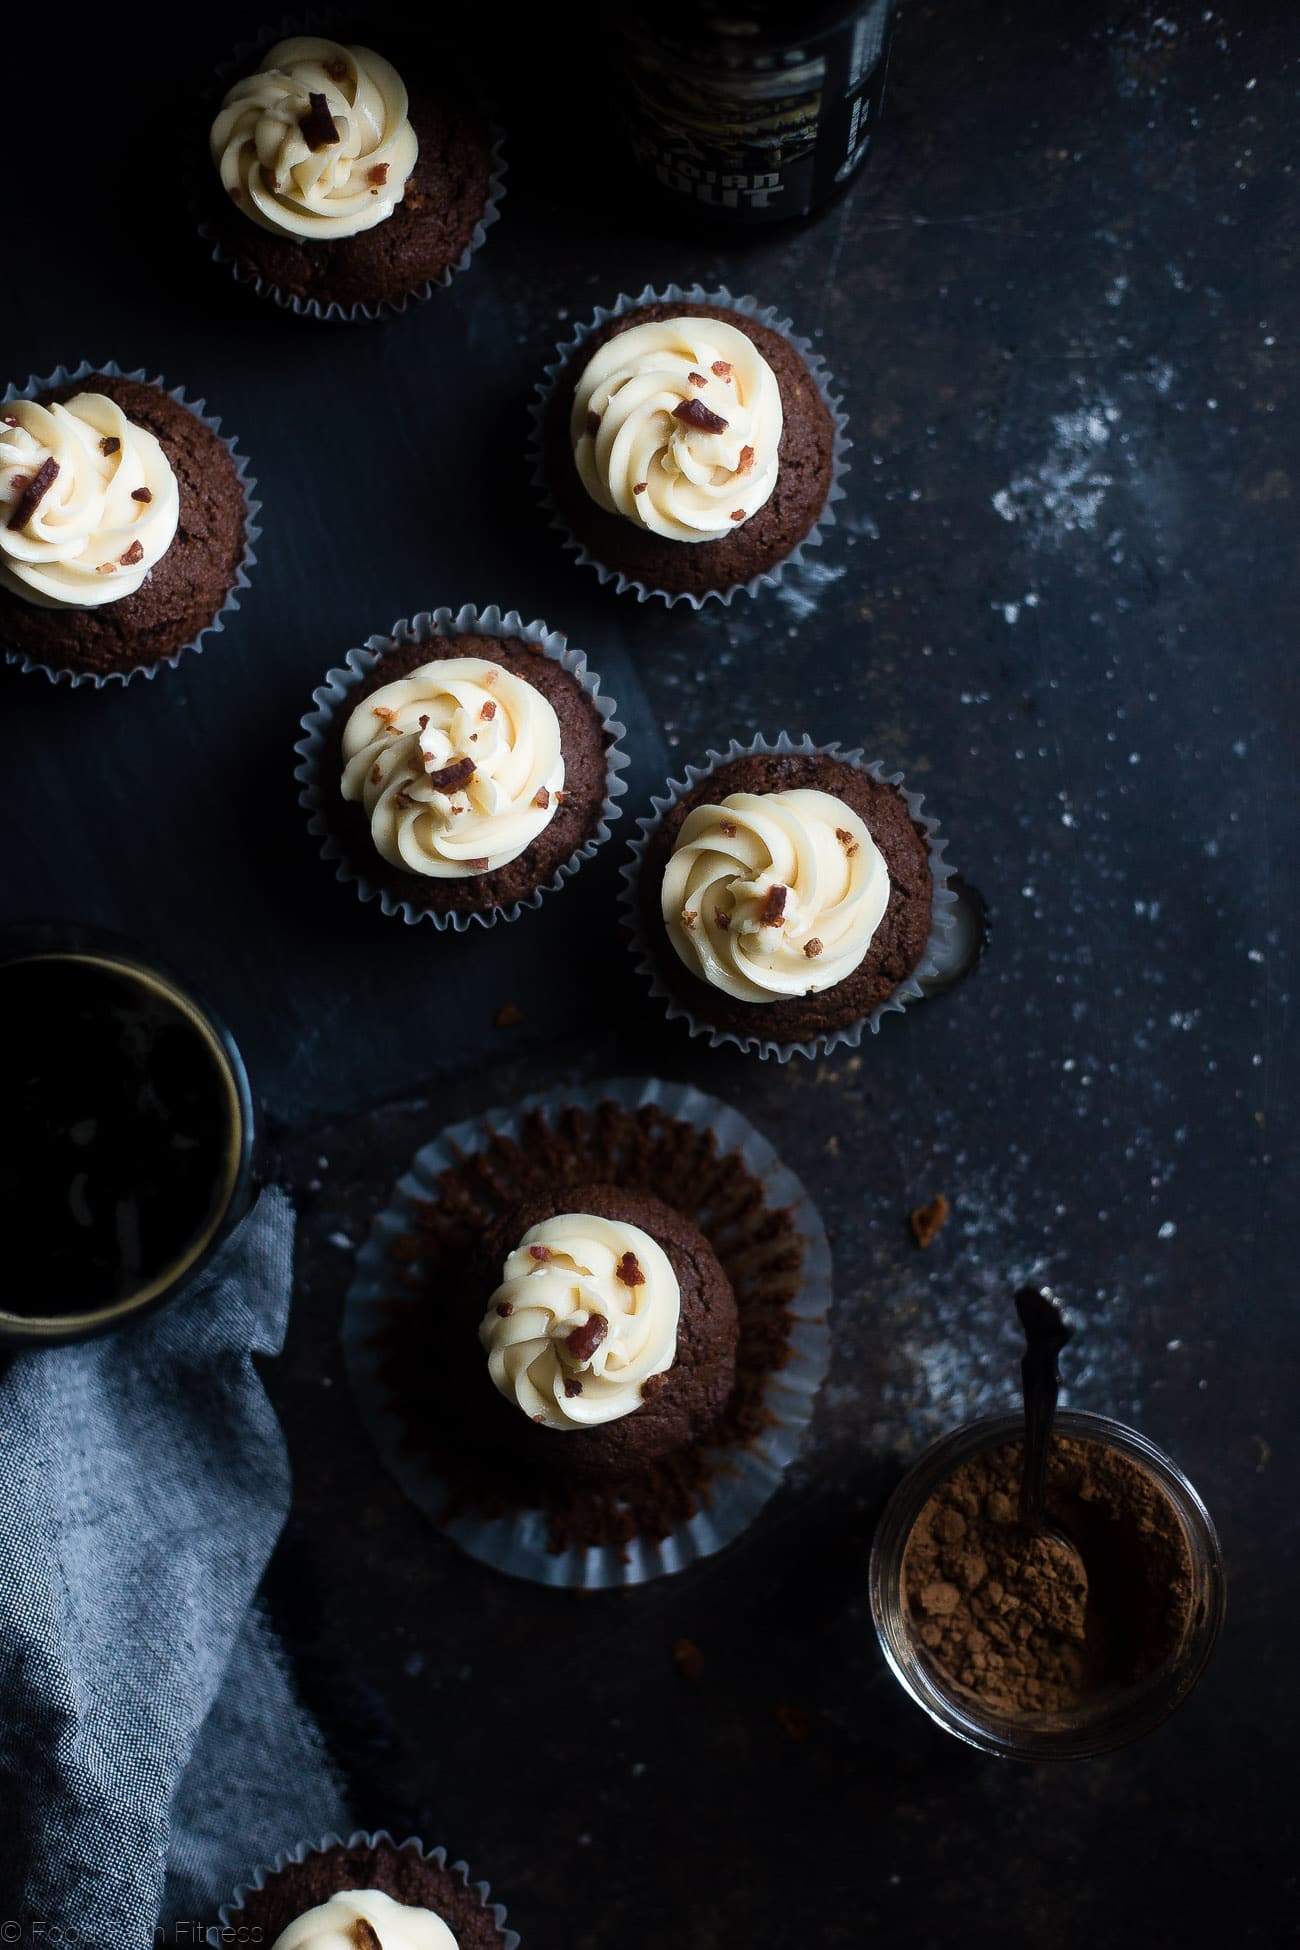 Gluten Free Chocolate Bacon Beer Cupcakes - These gluten free beer cupcakes have a secret, salty bacon twist and bacon fat buttercream! They're an easy, grain free dessert that's perfect for St Patrick's Day! | Foodfaithfitness.com | @FoodFaithFit